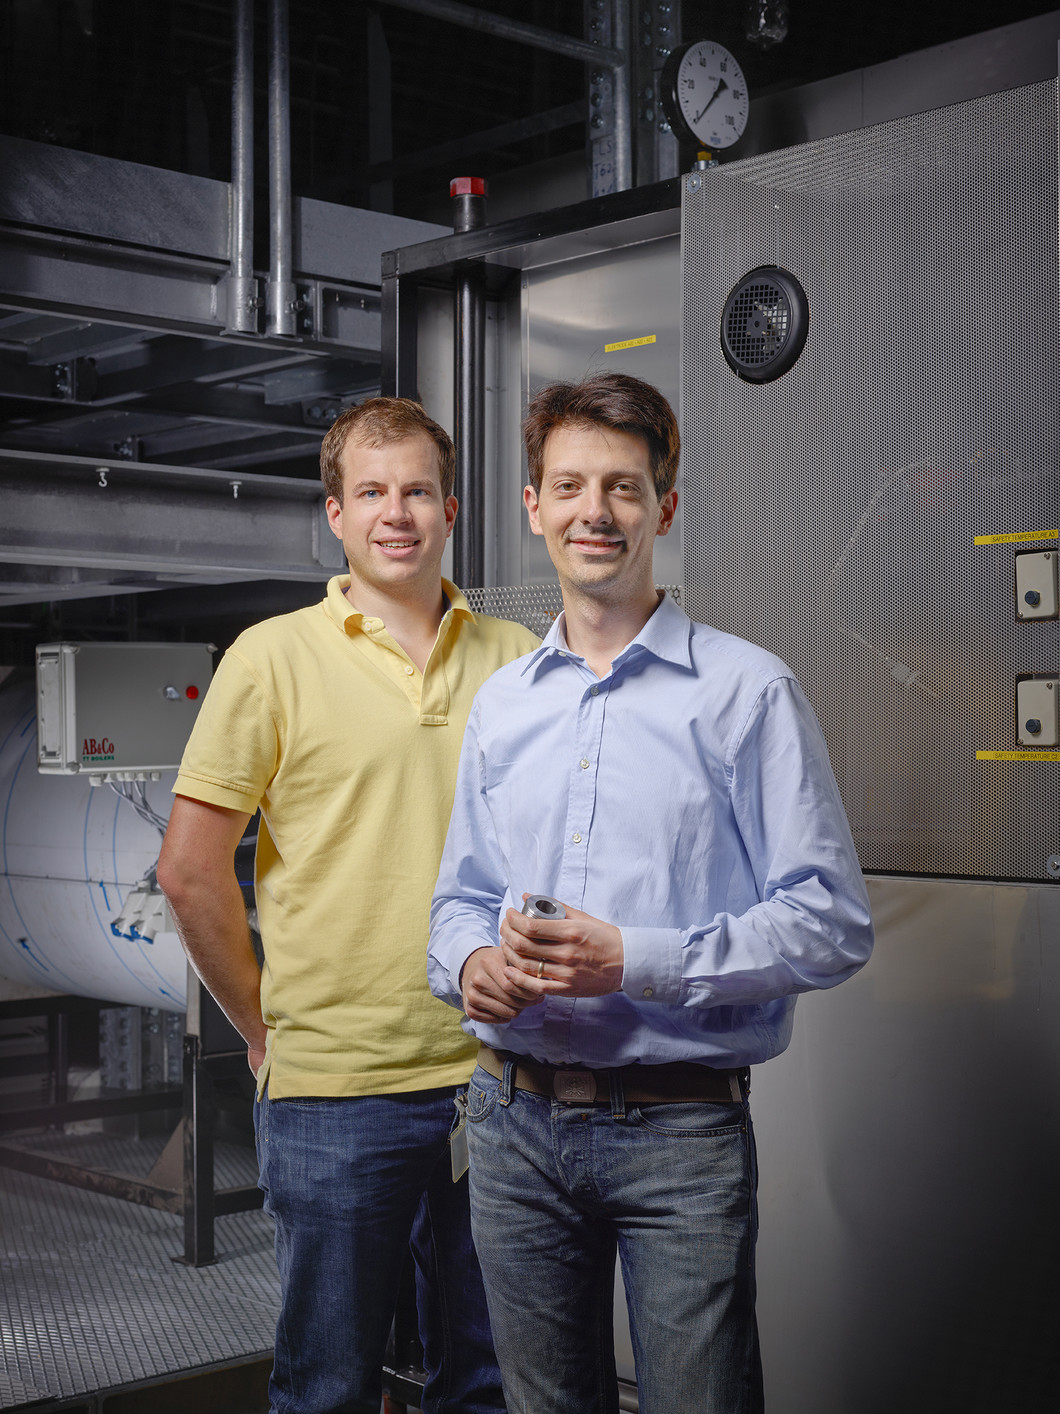 PSI researcher Markus Obrist and Giacomo Colmegna engineer with Ticino based company Casale study efficient processes for the production of basic chemical products.(Photo : Scanderbeg Sauer Photography)